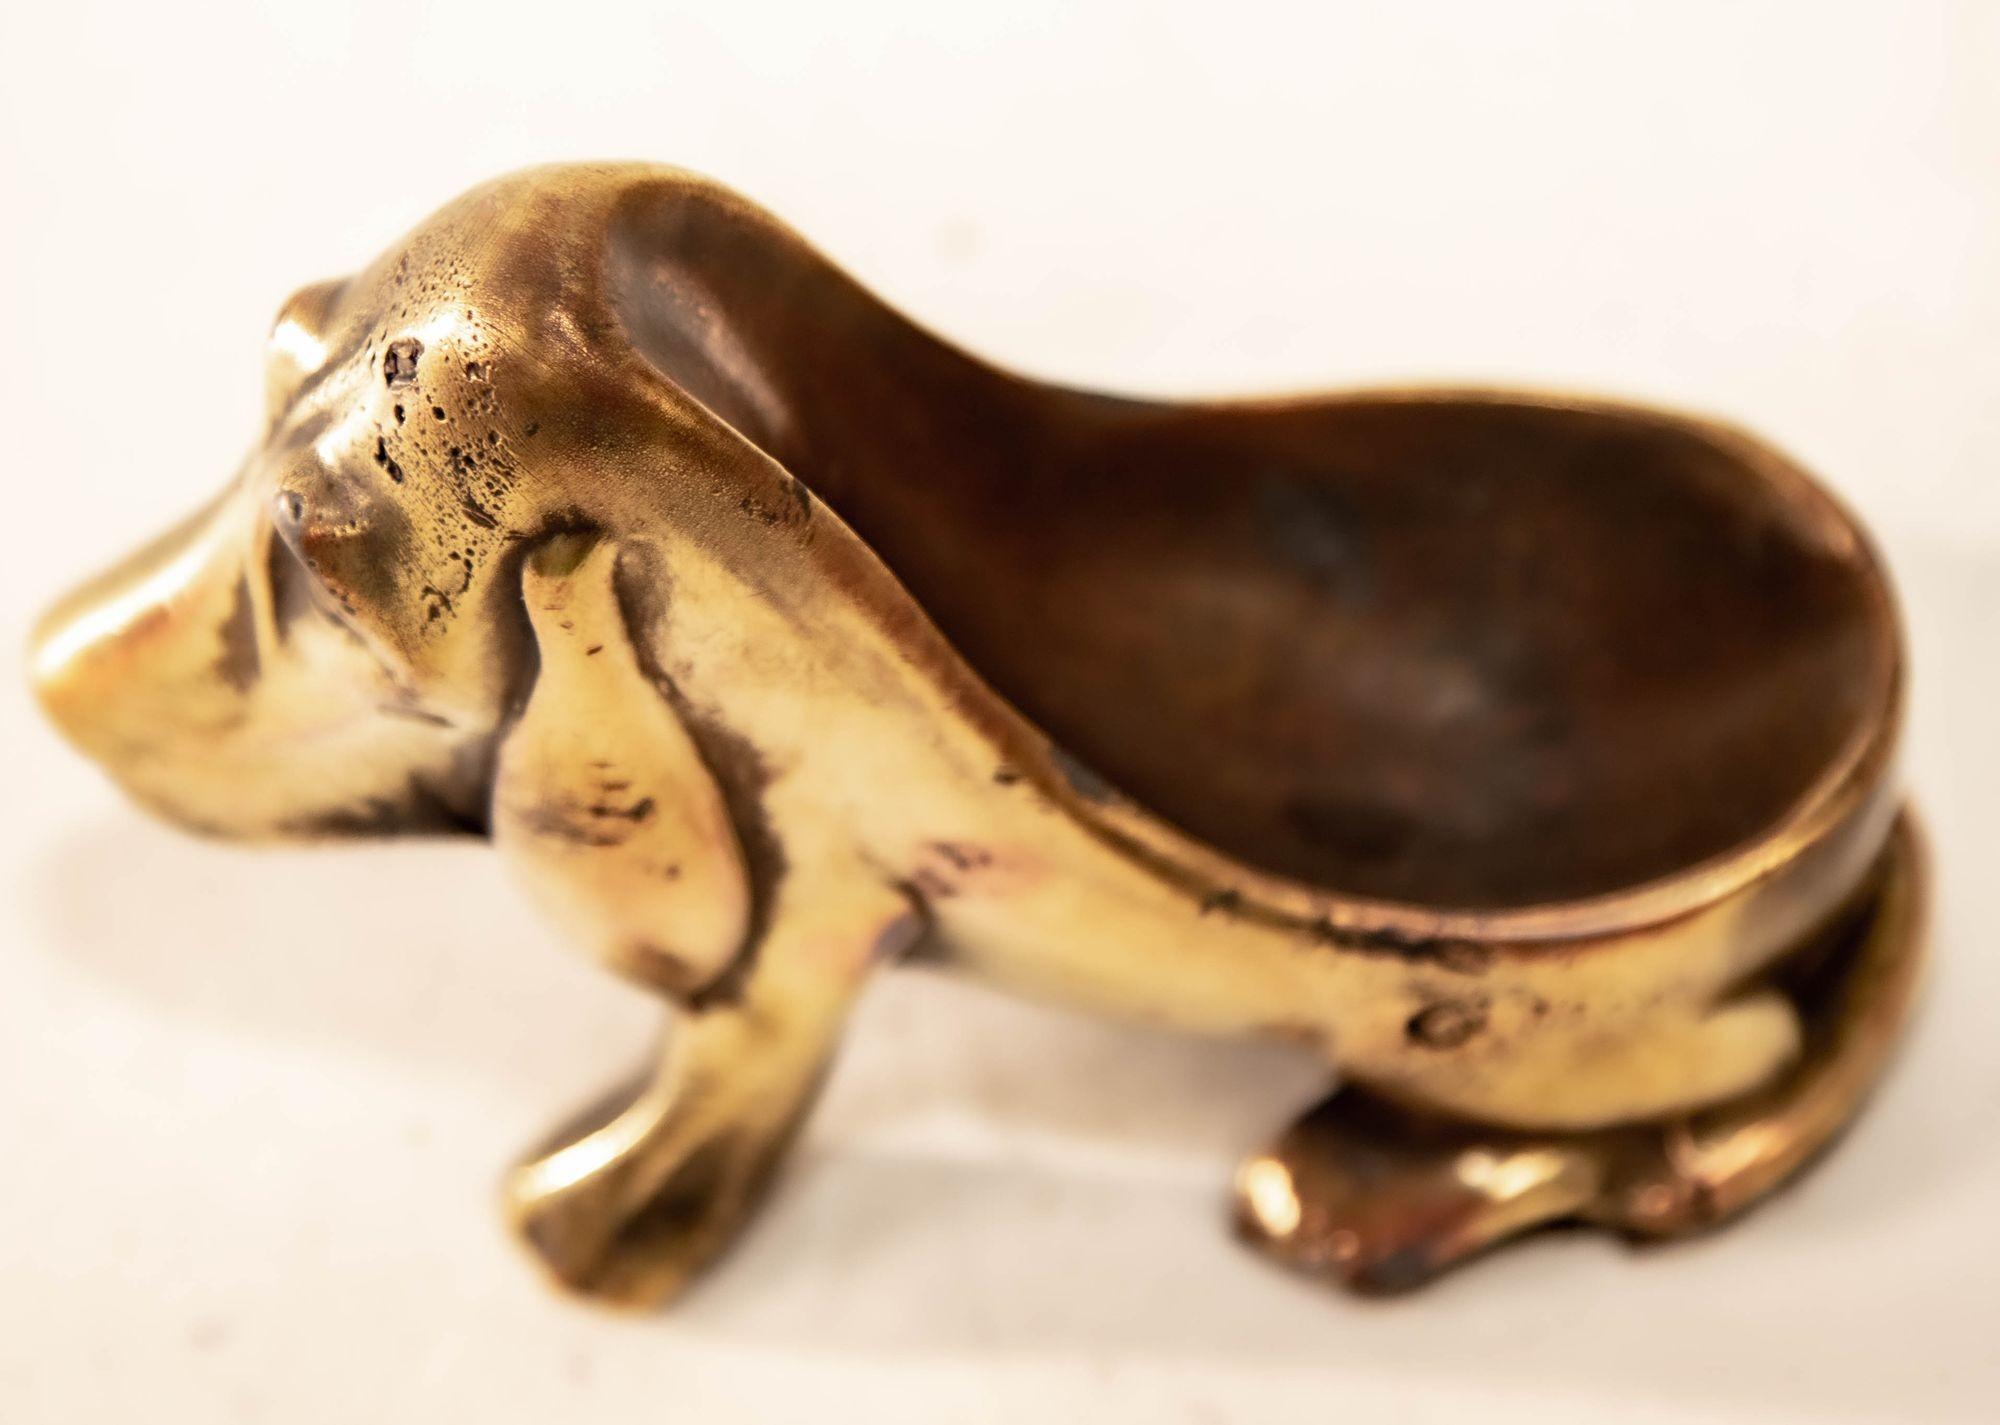 Antique Bassett Hound Metal brass Figurine Pipe holder.
Ashtray brass dog figurine with nice patina.
As well as pipes, this can hold any small treasures from rings to small parts.
By Ronson Metal Art this Basset Hound is amazing.
Pipe Stand Solid